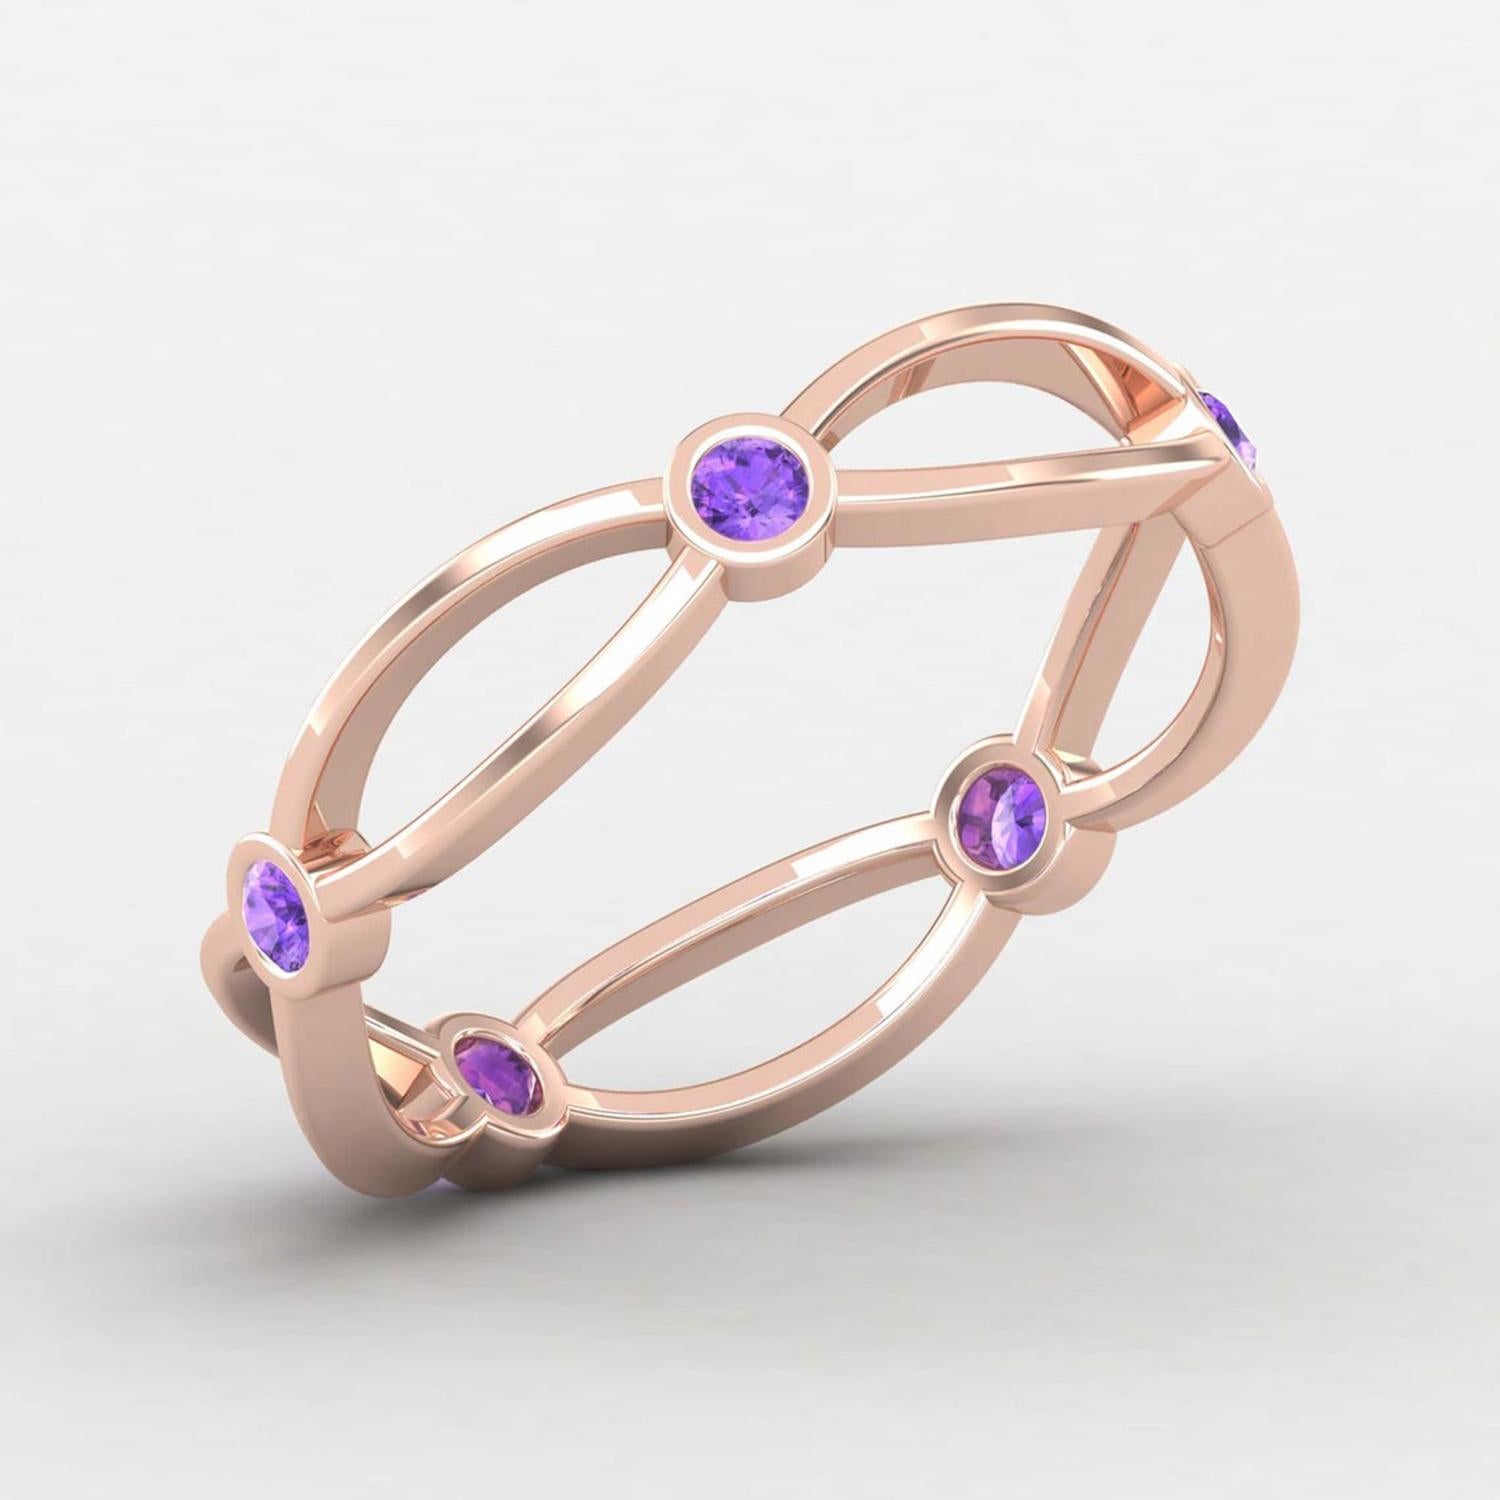 Modern 14k Gold Round Amethyst Ring / February Birthstone Ring / Ring for Her For Sale